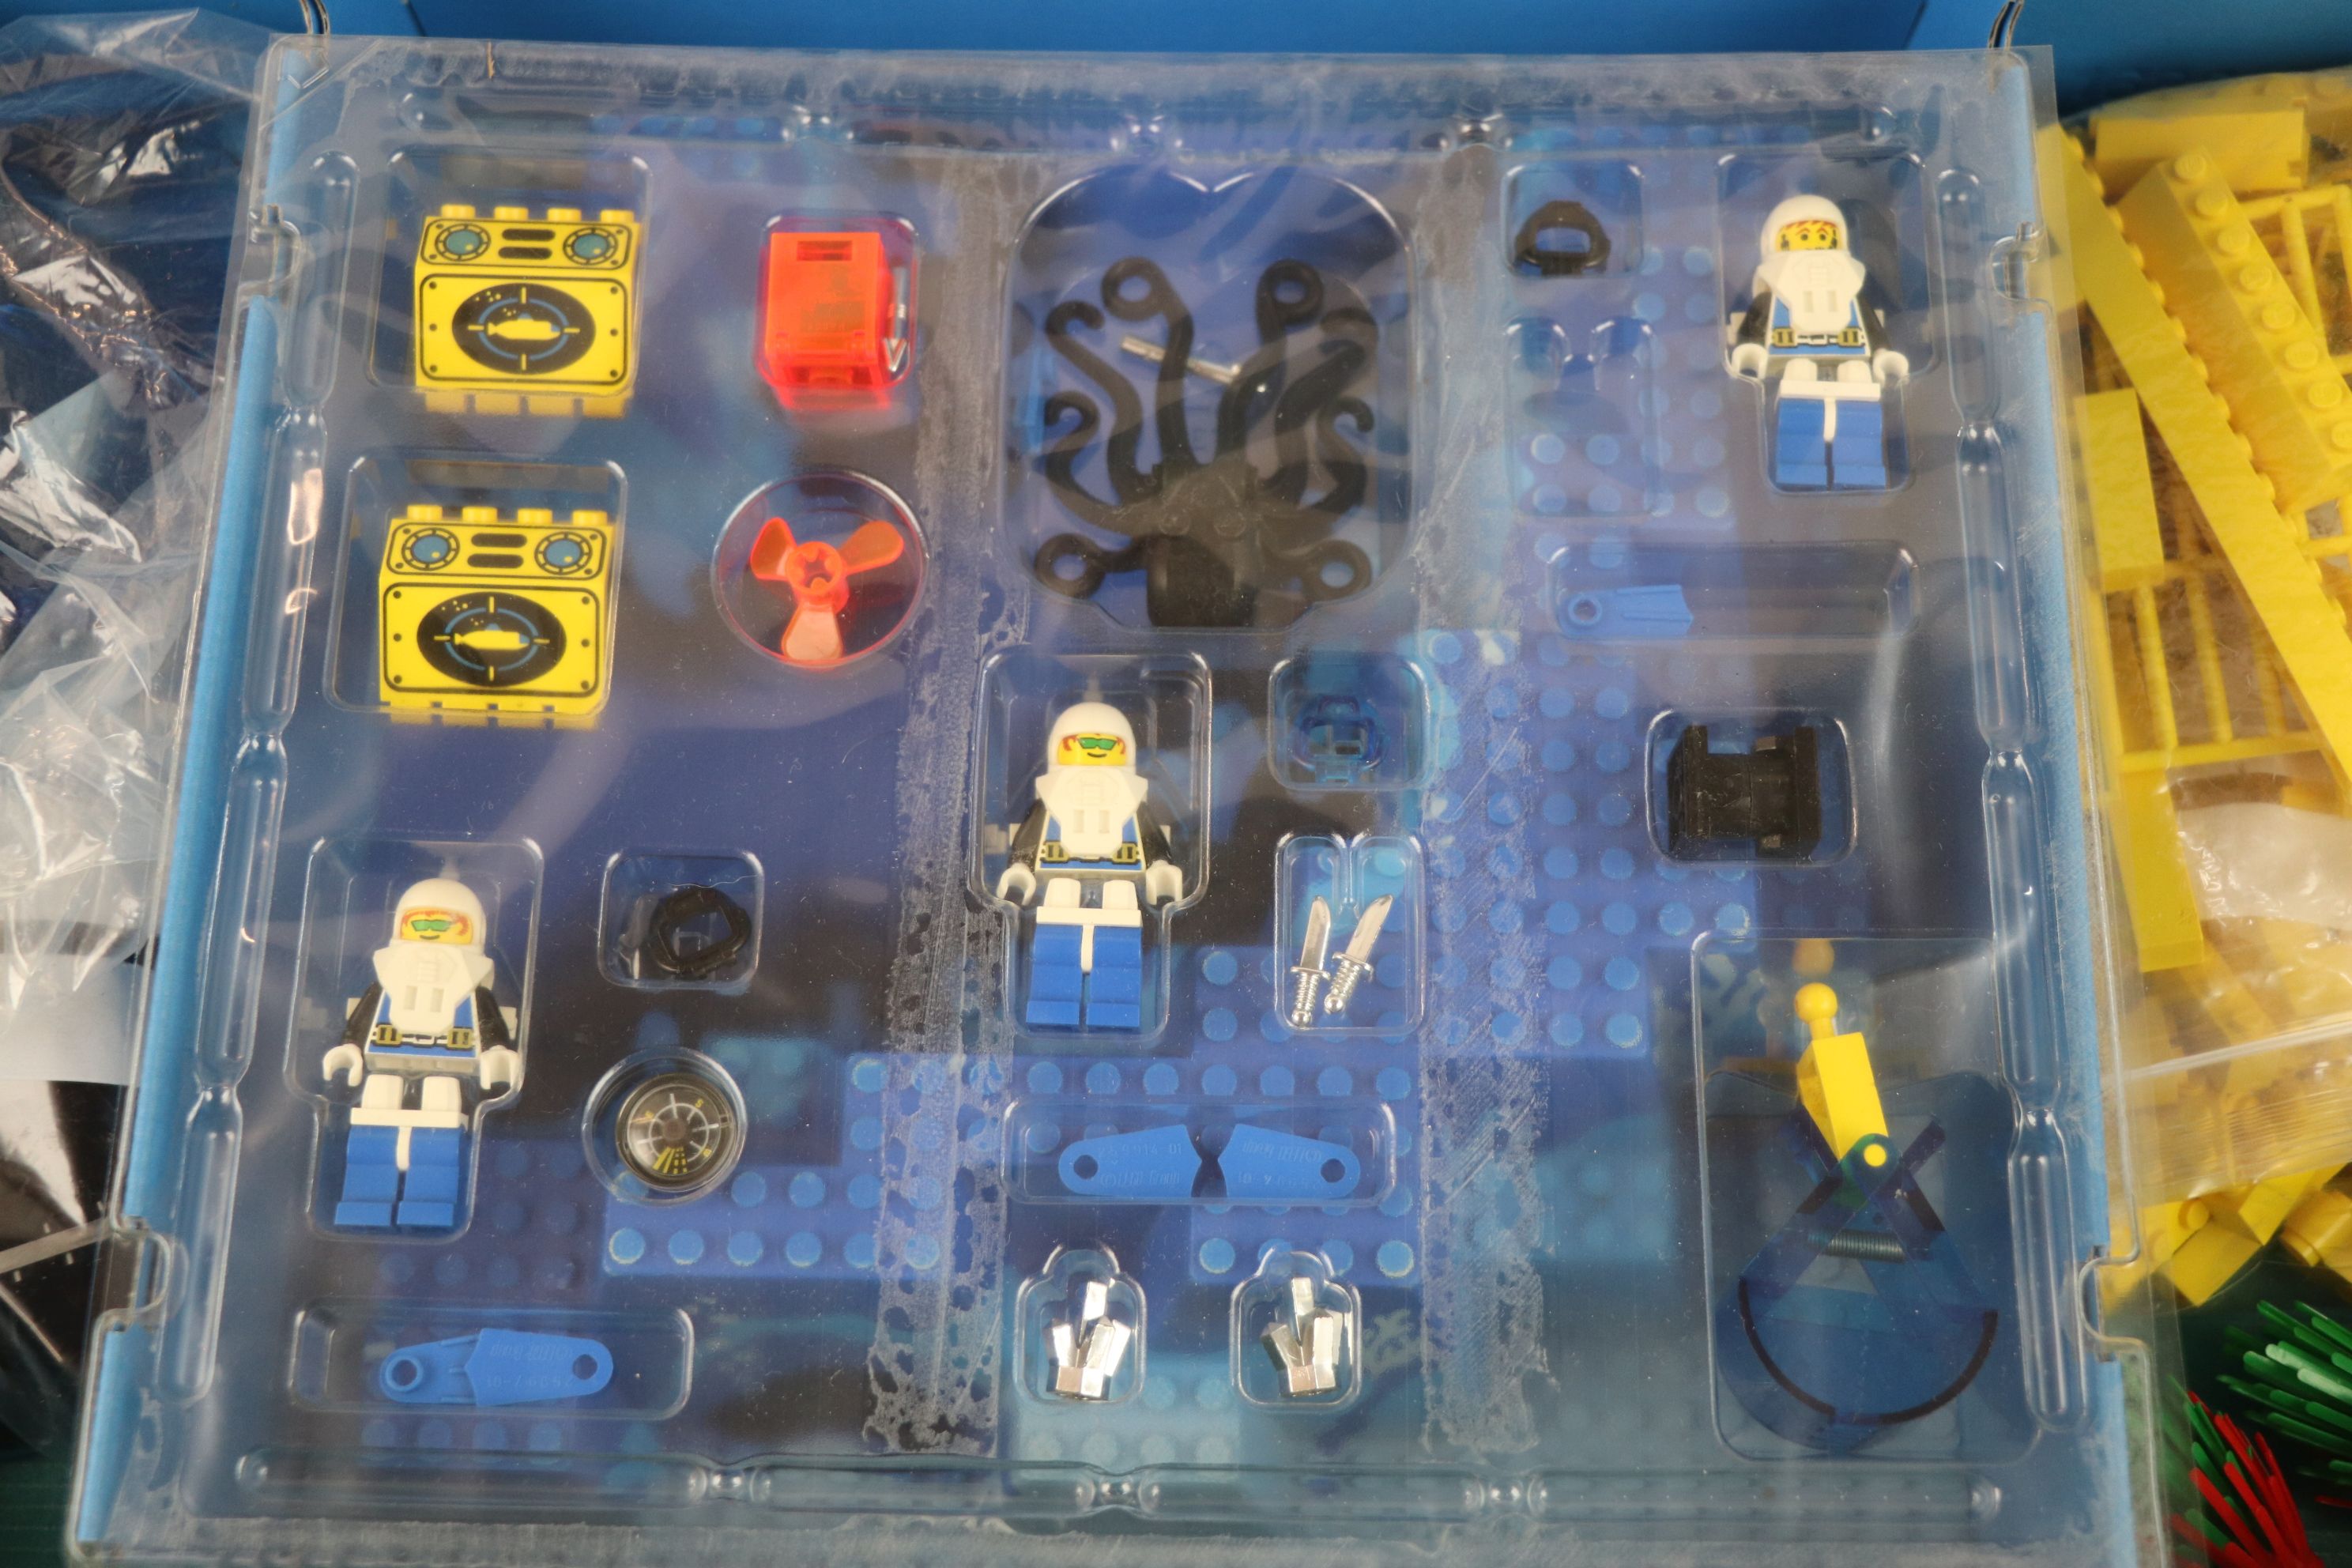 Lego - Boxed Lego System 6195 Aquanauts Neptune Discovery set unchecked but appearing complete - Image 12 of 16